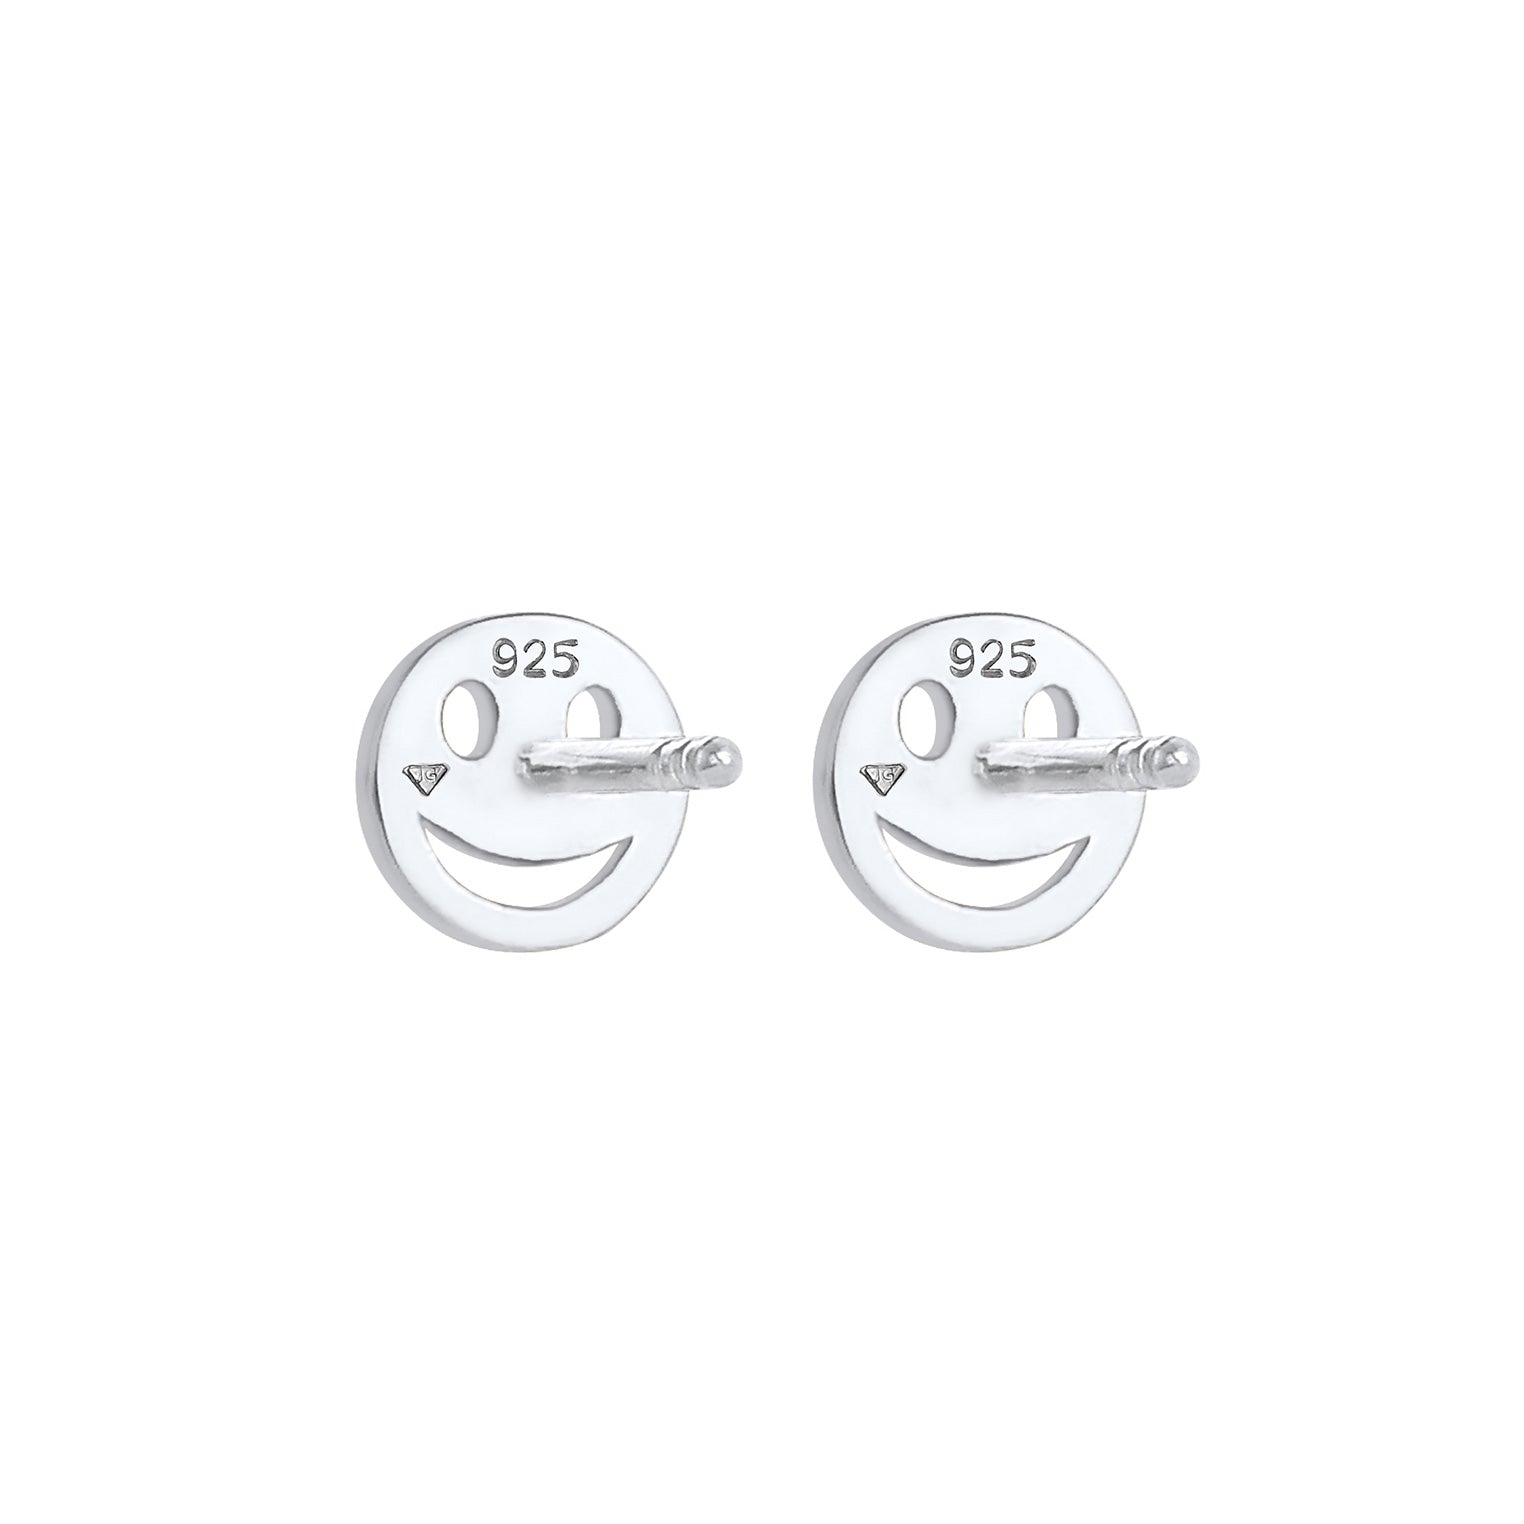 Ohrring mit Smiling Face Jewelry Elli –